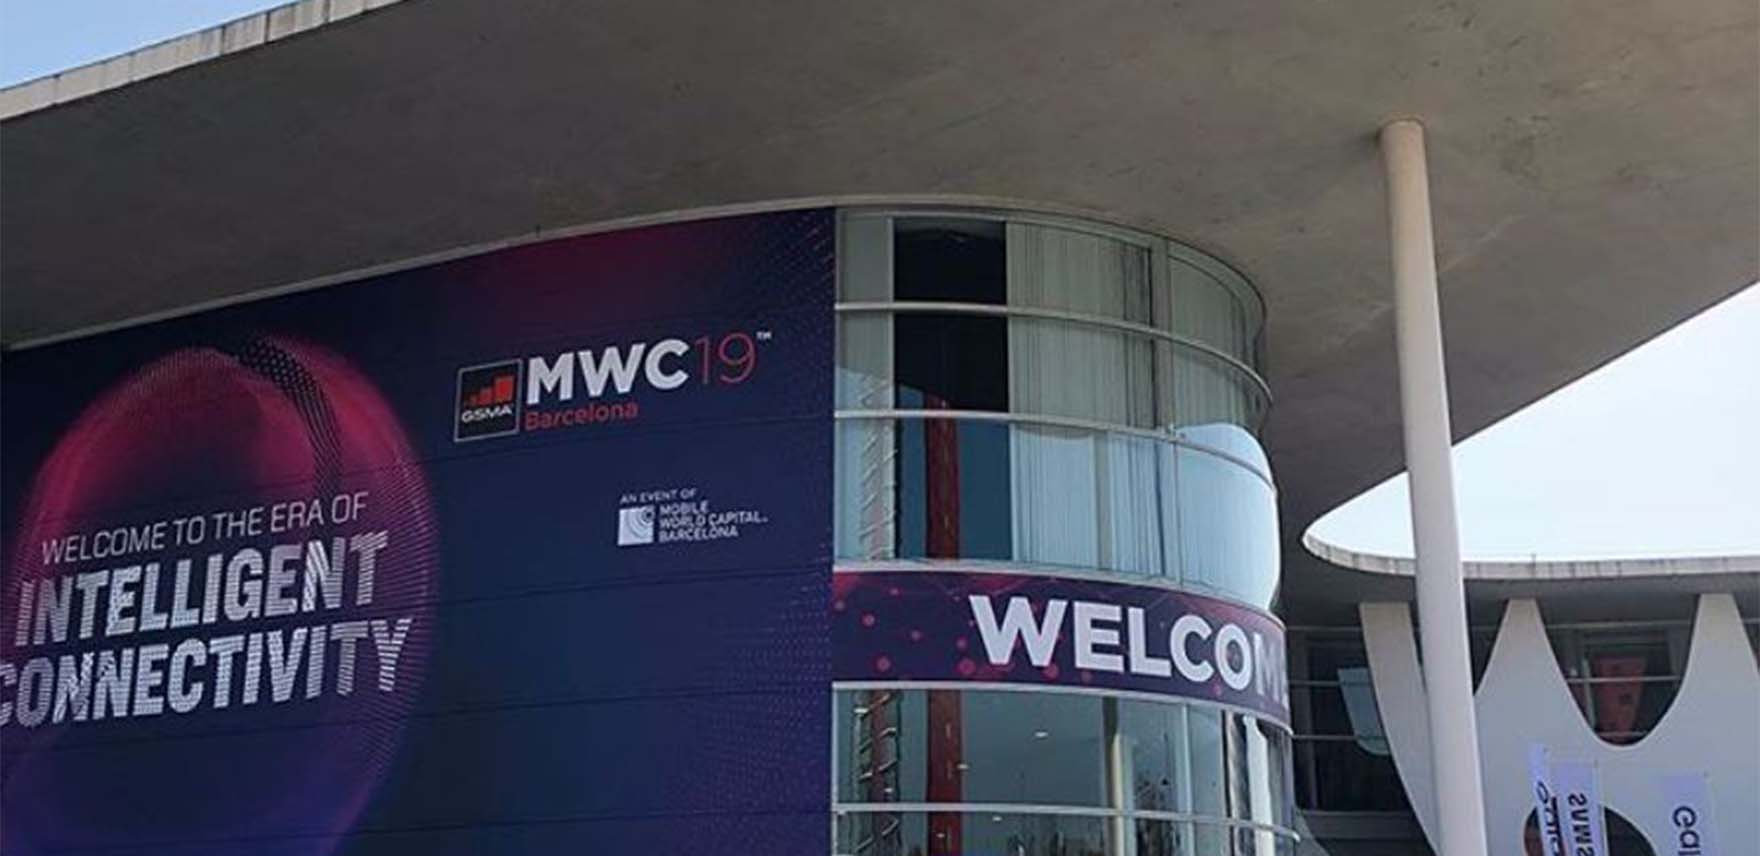 5G at MWC, here’s how this will change the way you work and live